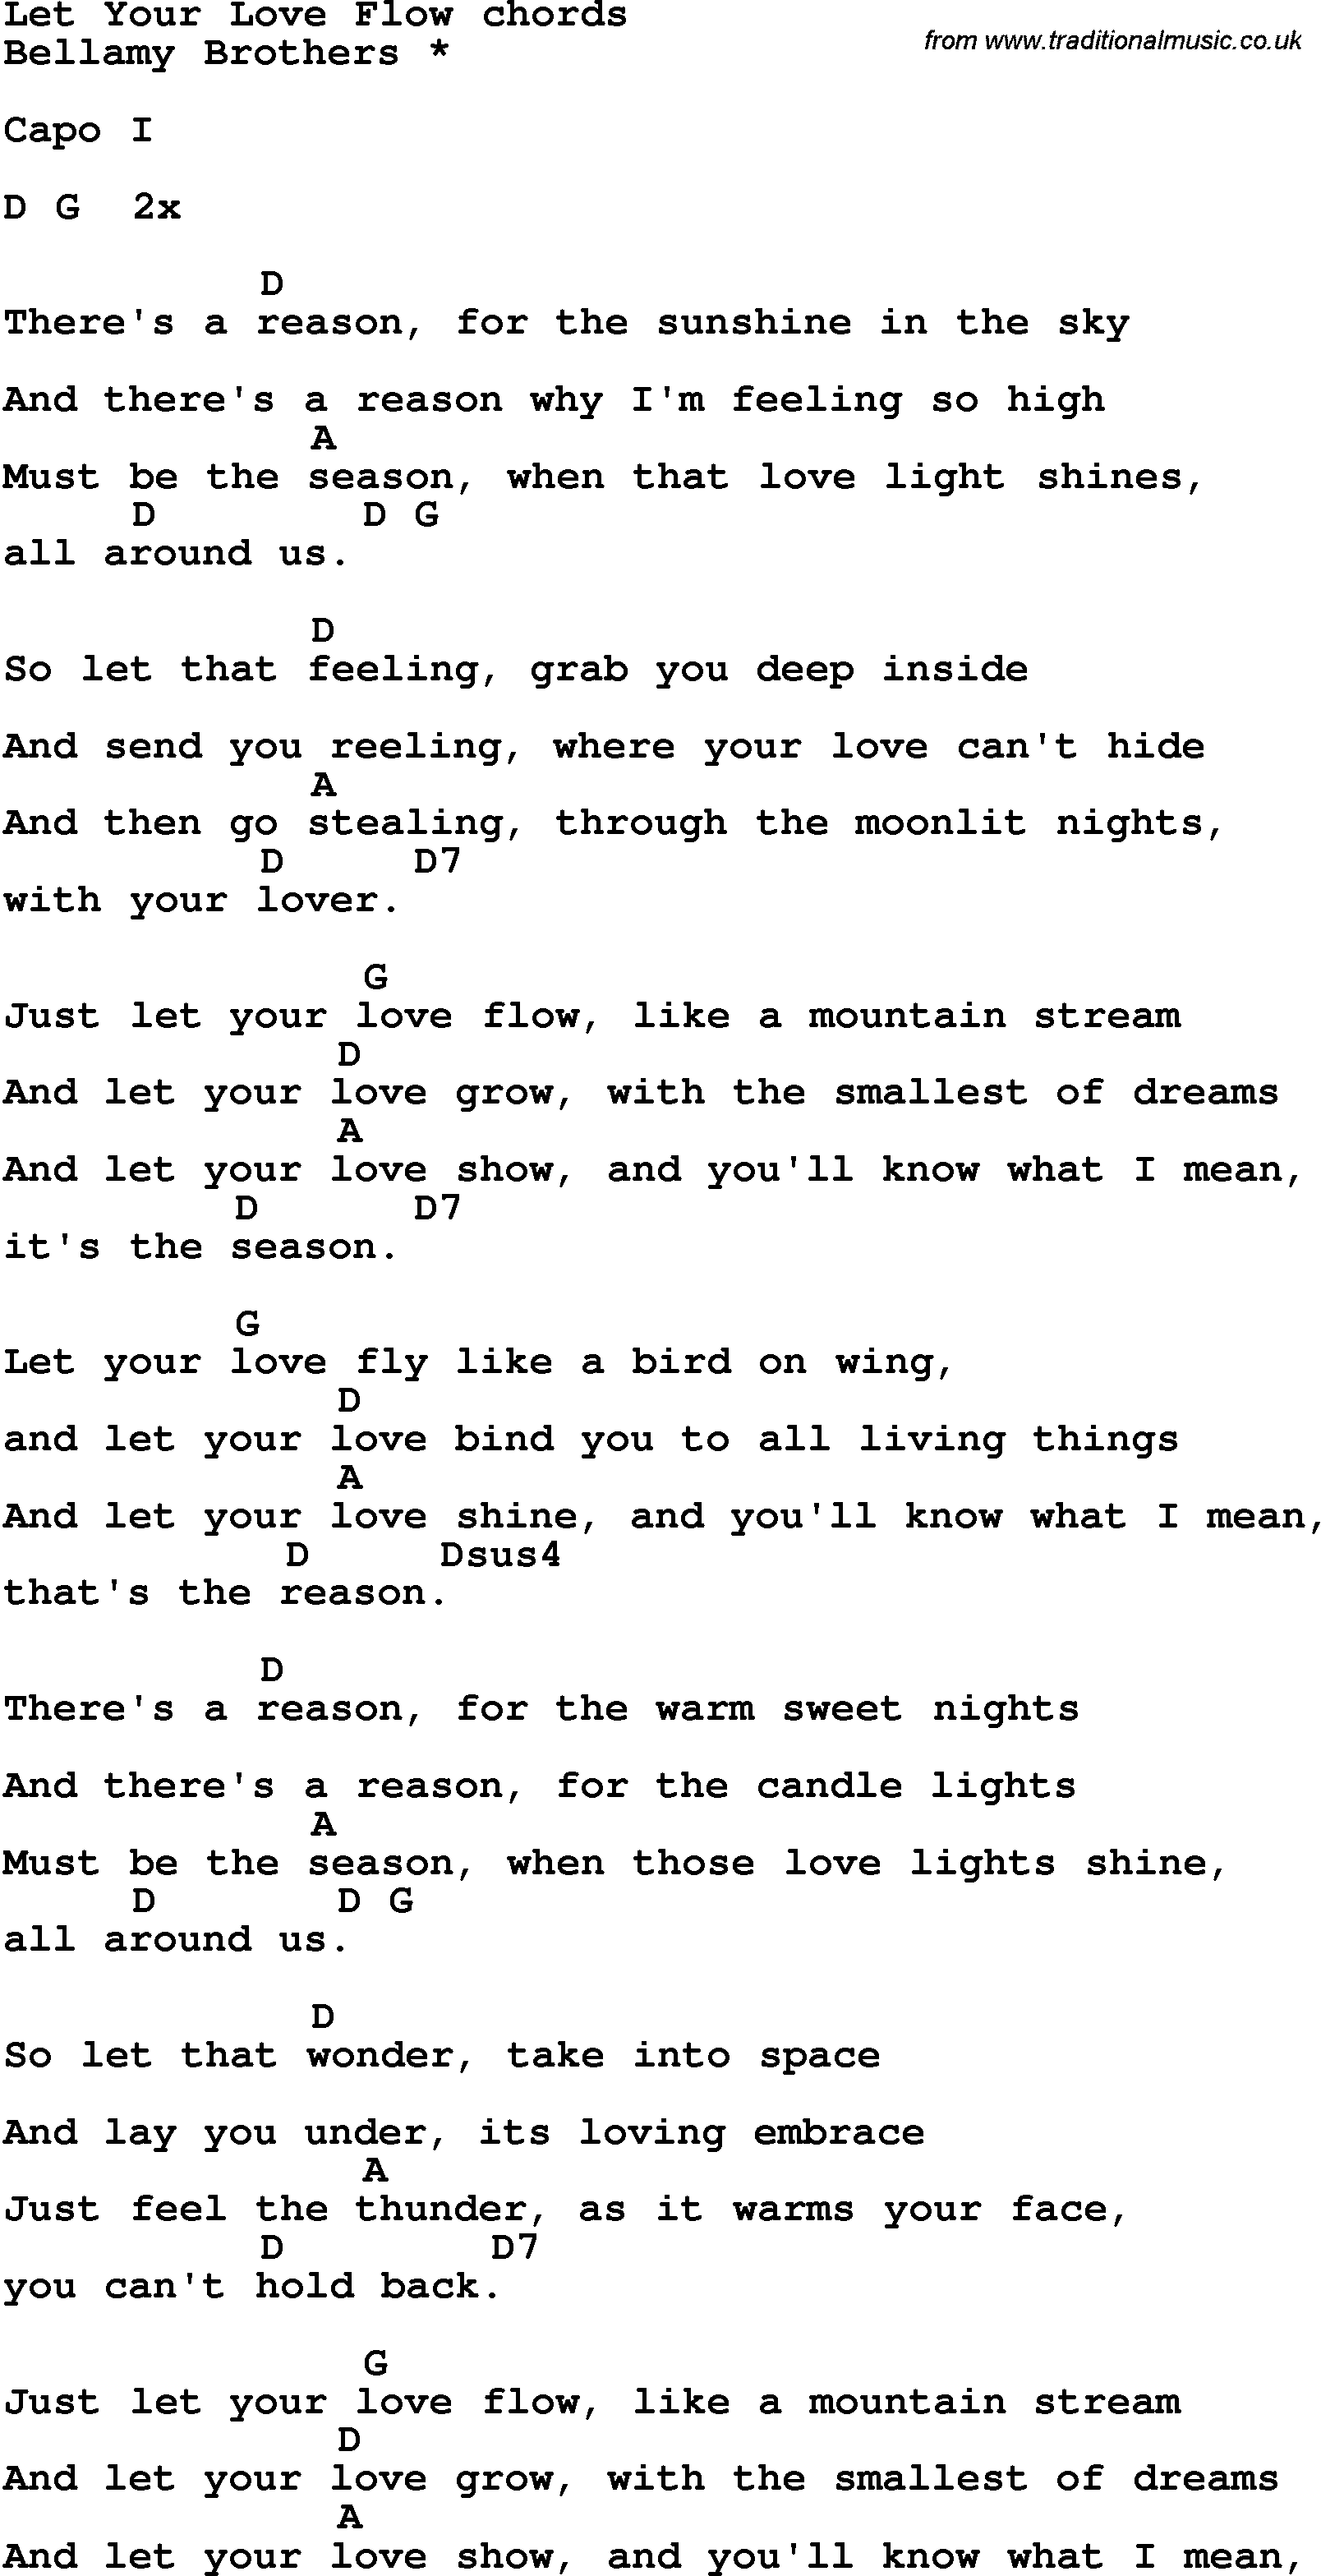 Song Lyrics with guitar chords for Let Your Love Flow